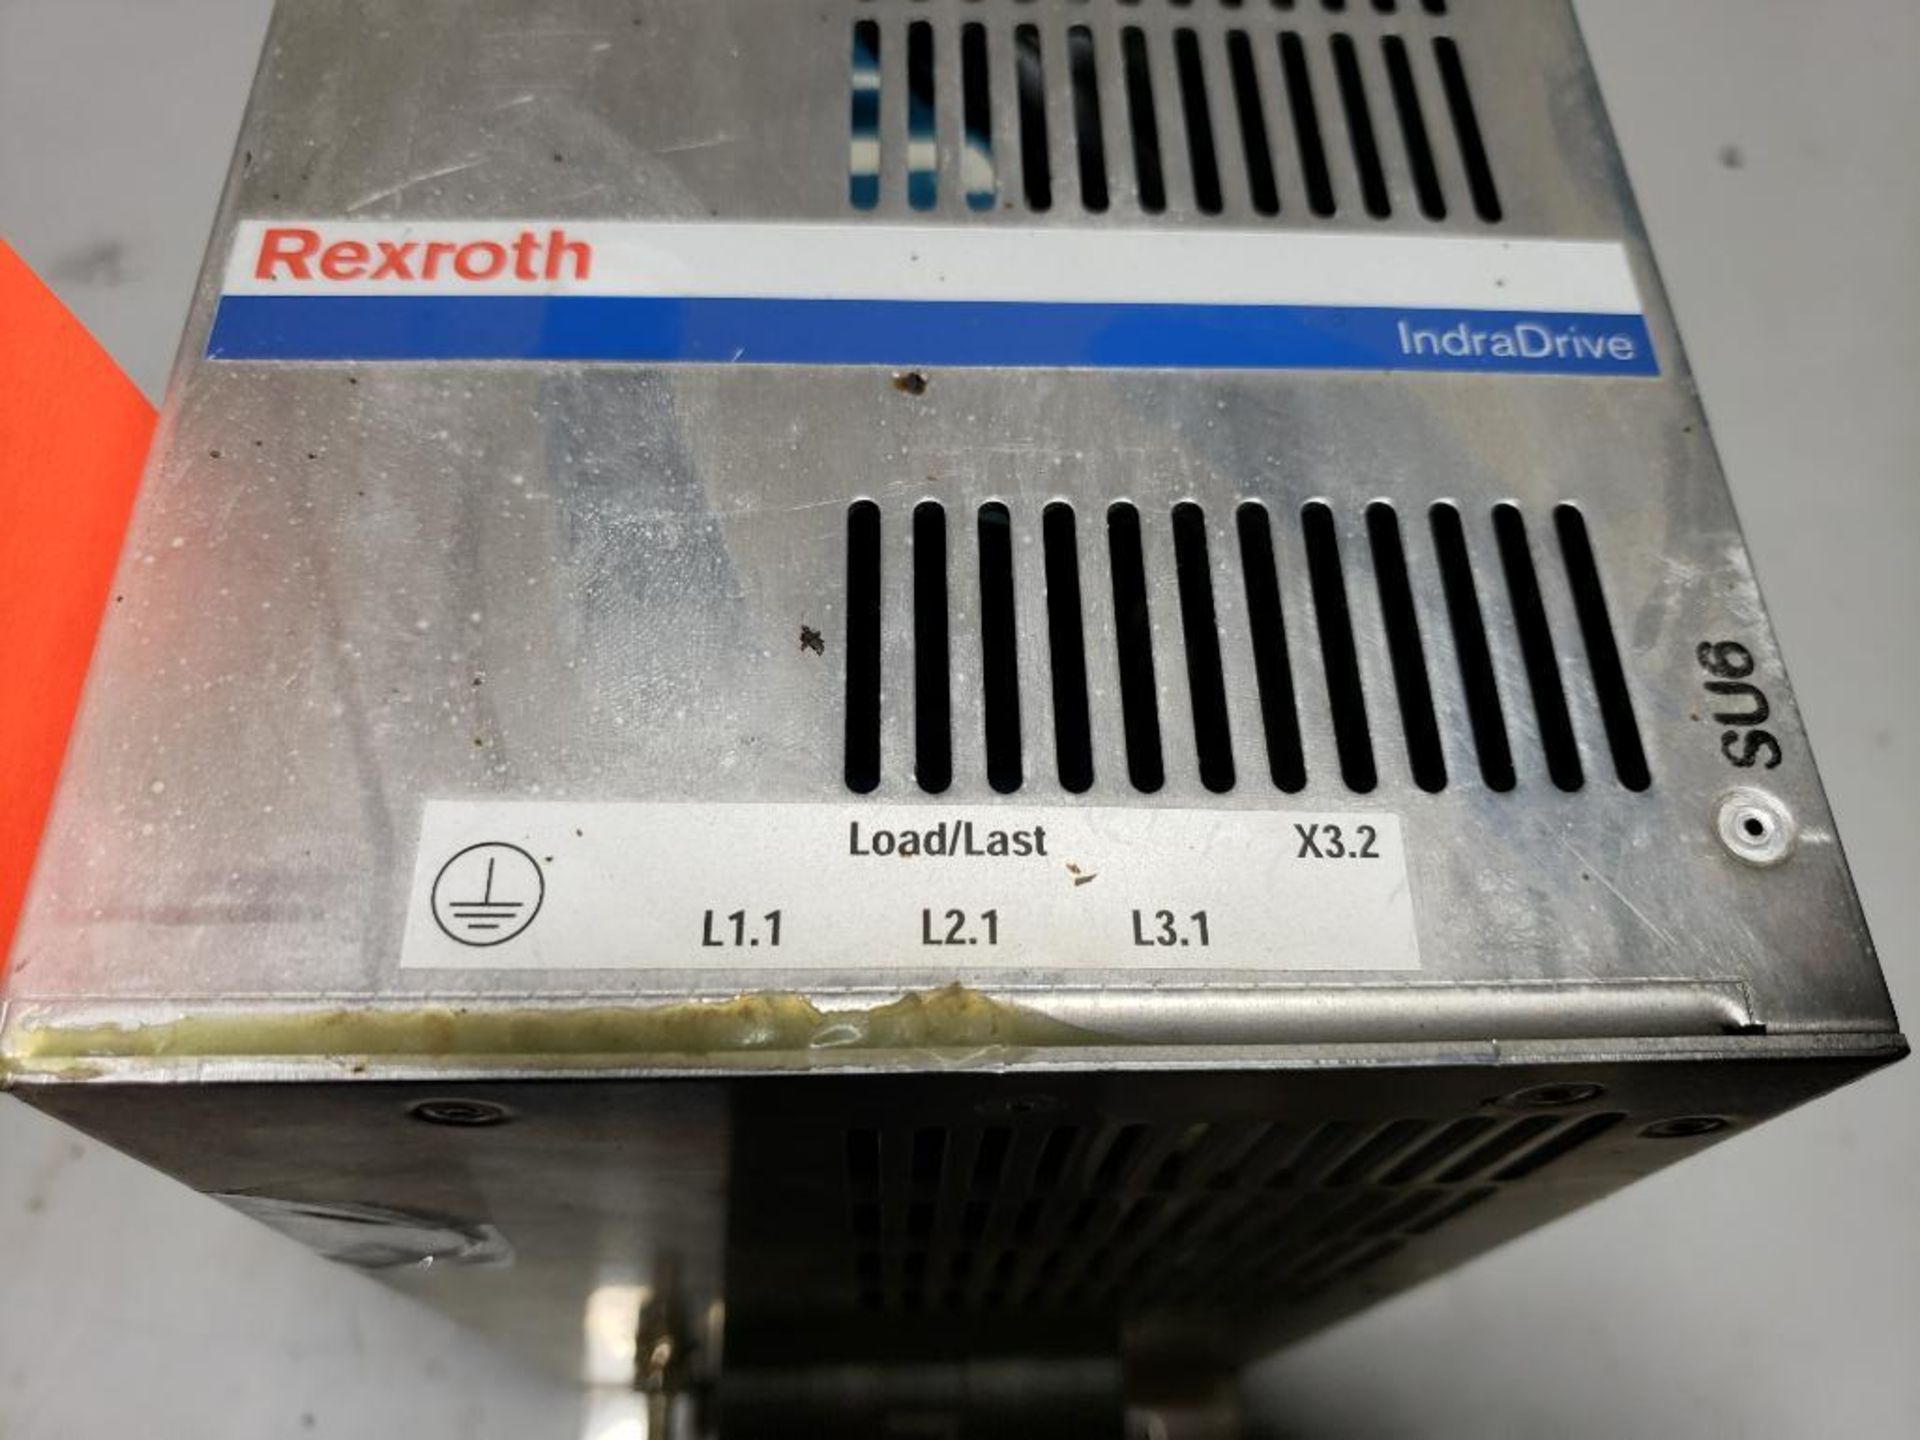 Rexroth drive. Model number HNF01.1A-F240-R0065-A-480-NNNN. - Image 2 of 6